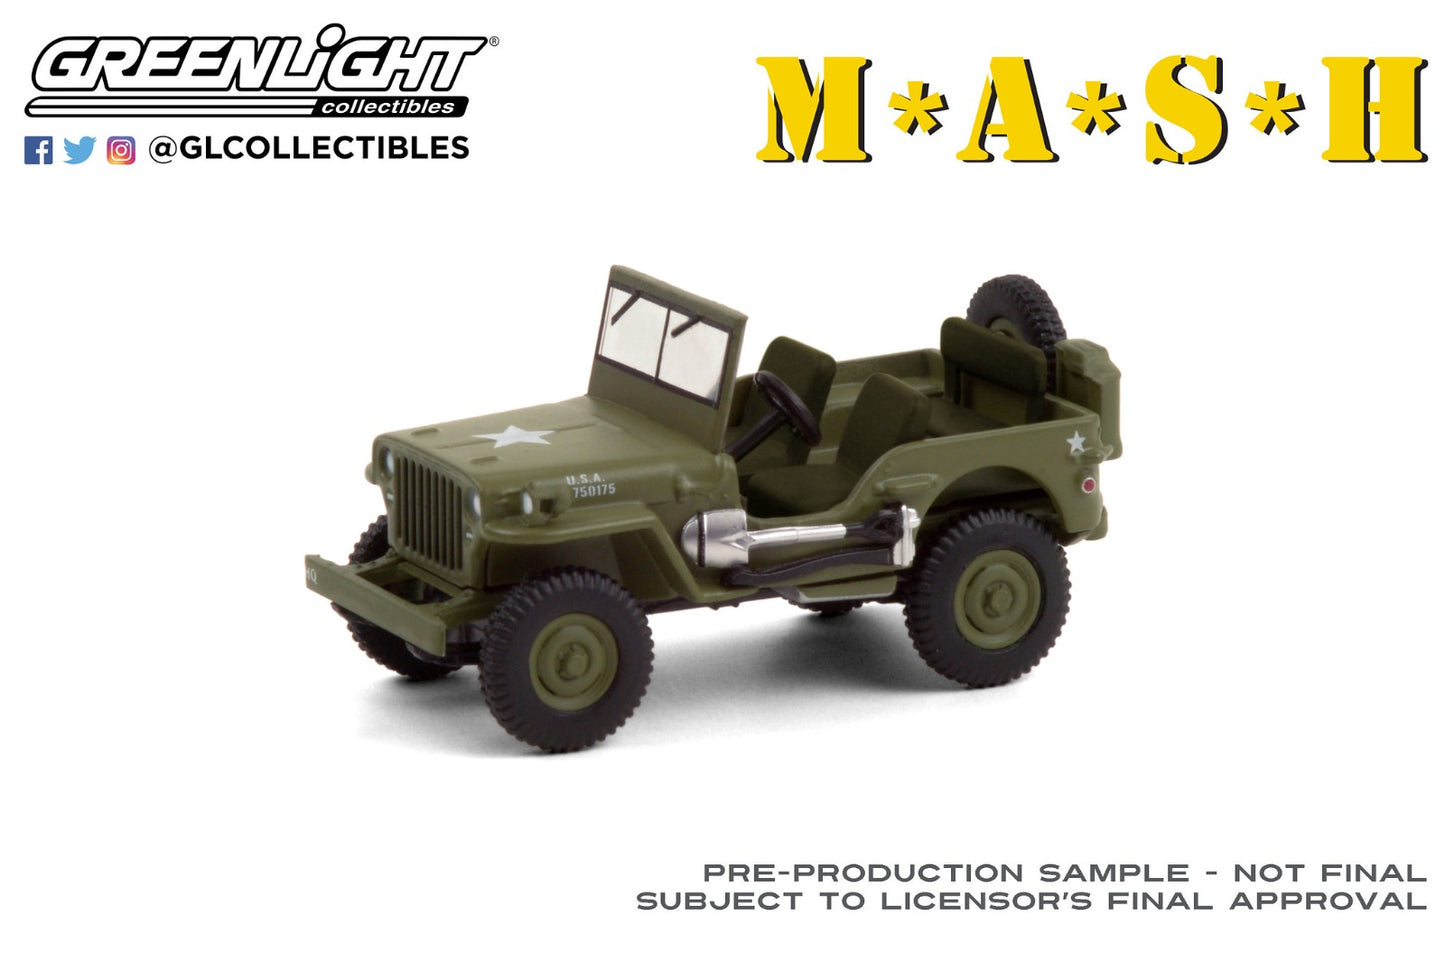 GreenLight 1:64 Hollywood Series 30 - M*A*S*H (1972-83 TV Series) - 1942 Willys MB Jeep 44900-A